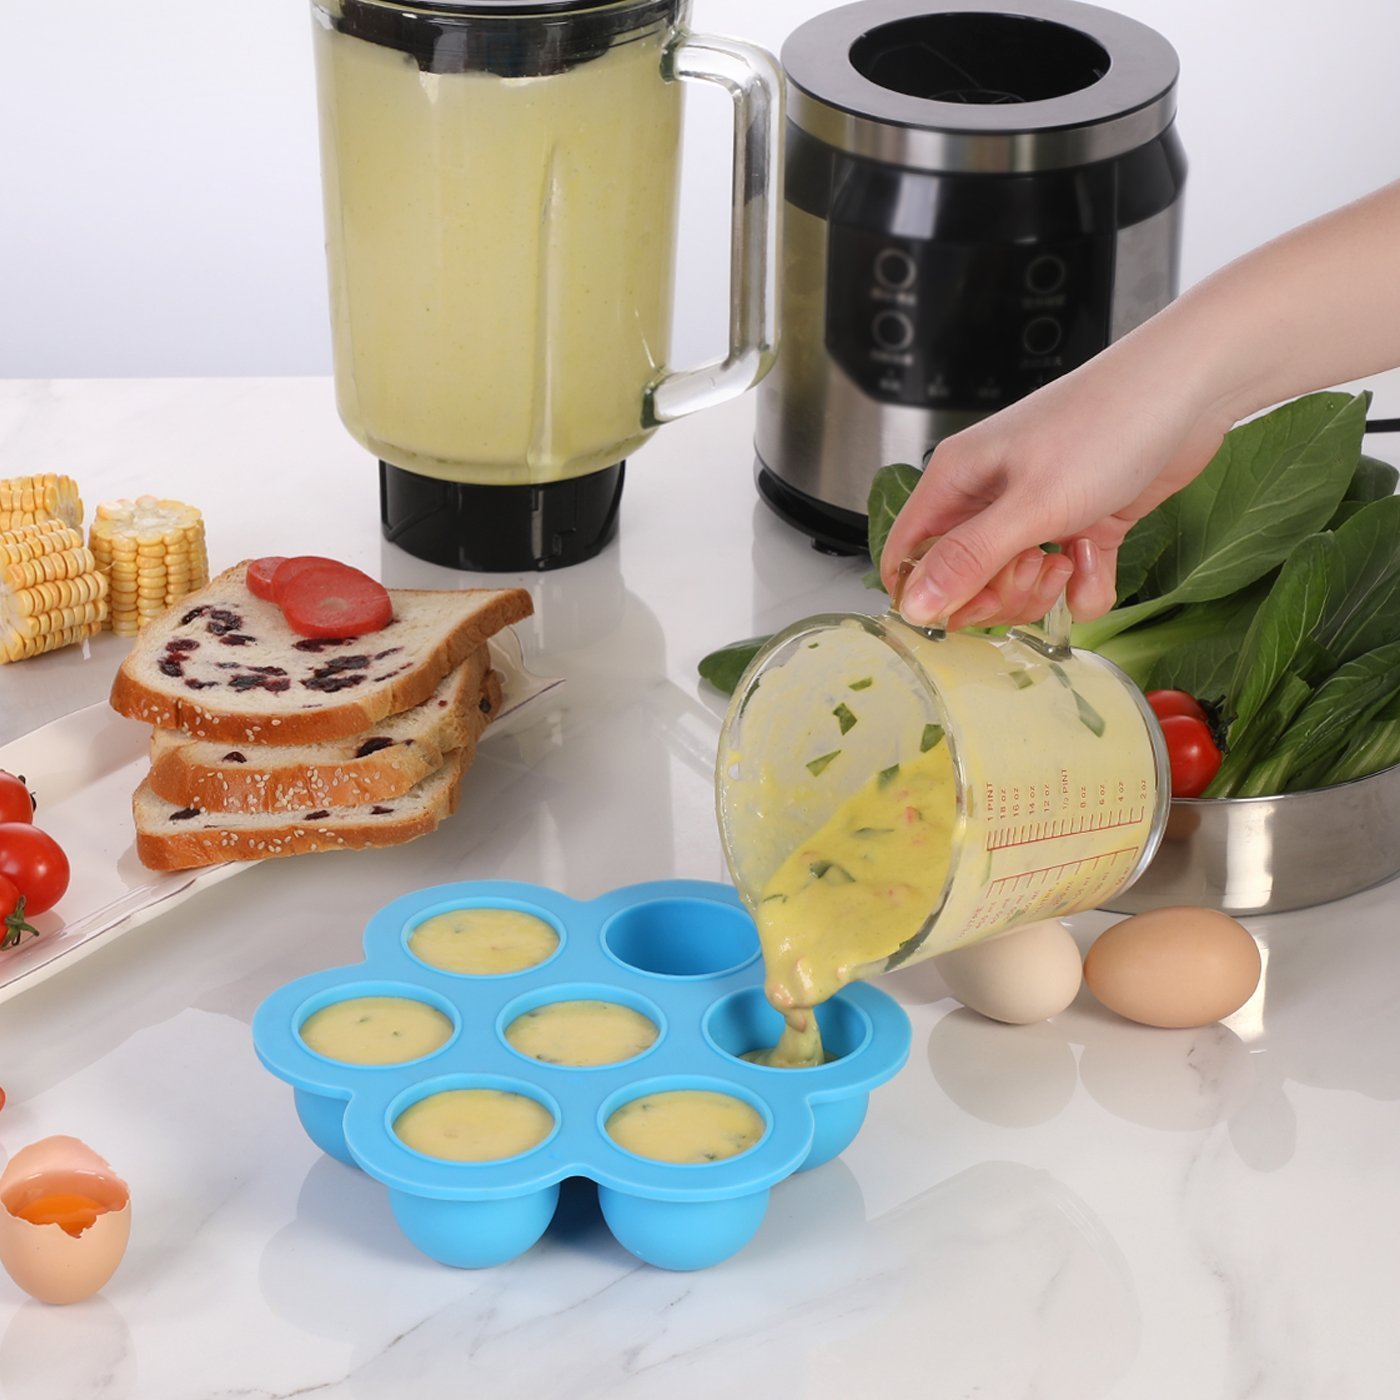 AOZITA Silicone Egg Bites Molds for Instant Pot Accessories - Fits Instant Pot 5,6,8 qt Pressure Cooker, Reusable Baby Food Storage Container and Freezer Tray with Lid, Sous Vide Egg Poacher